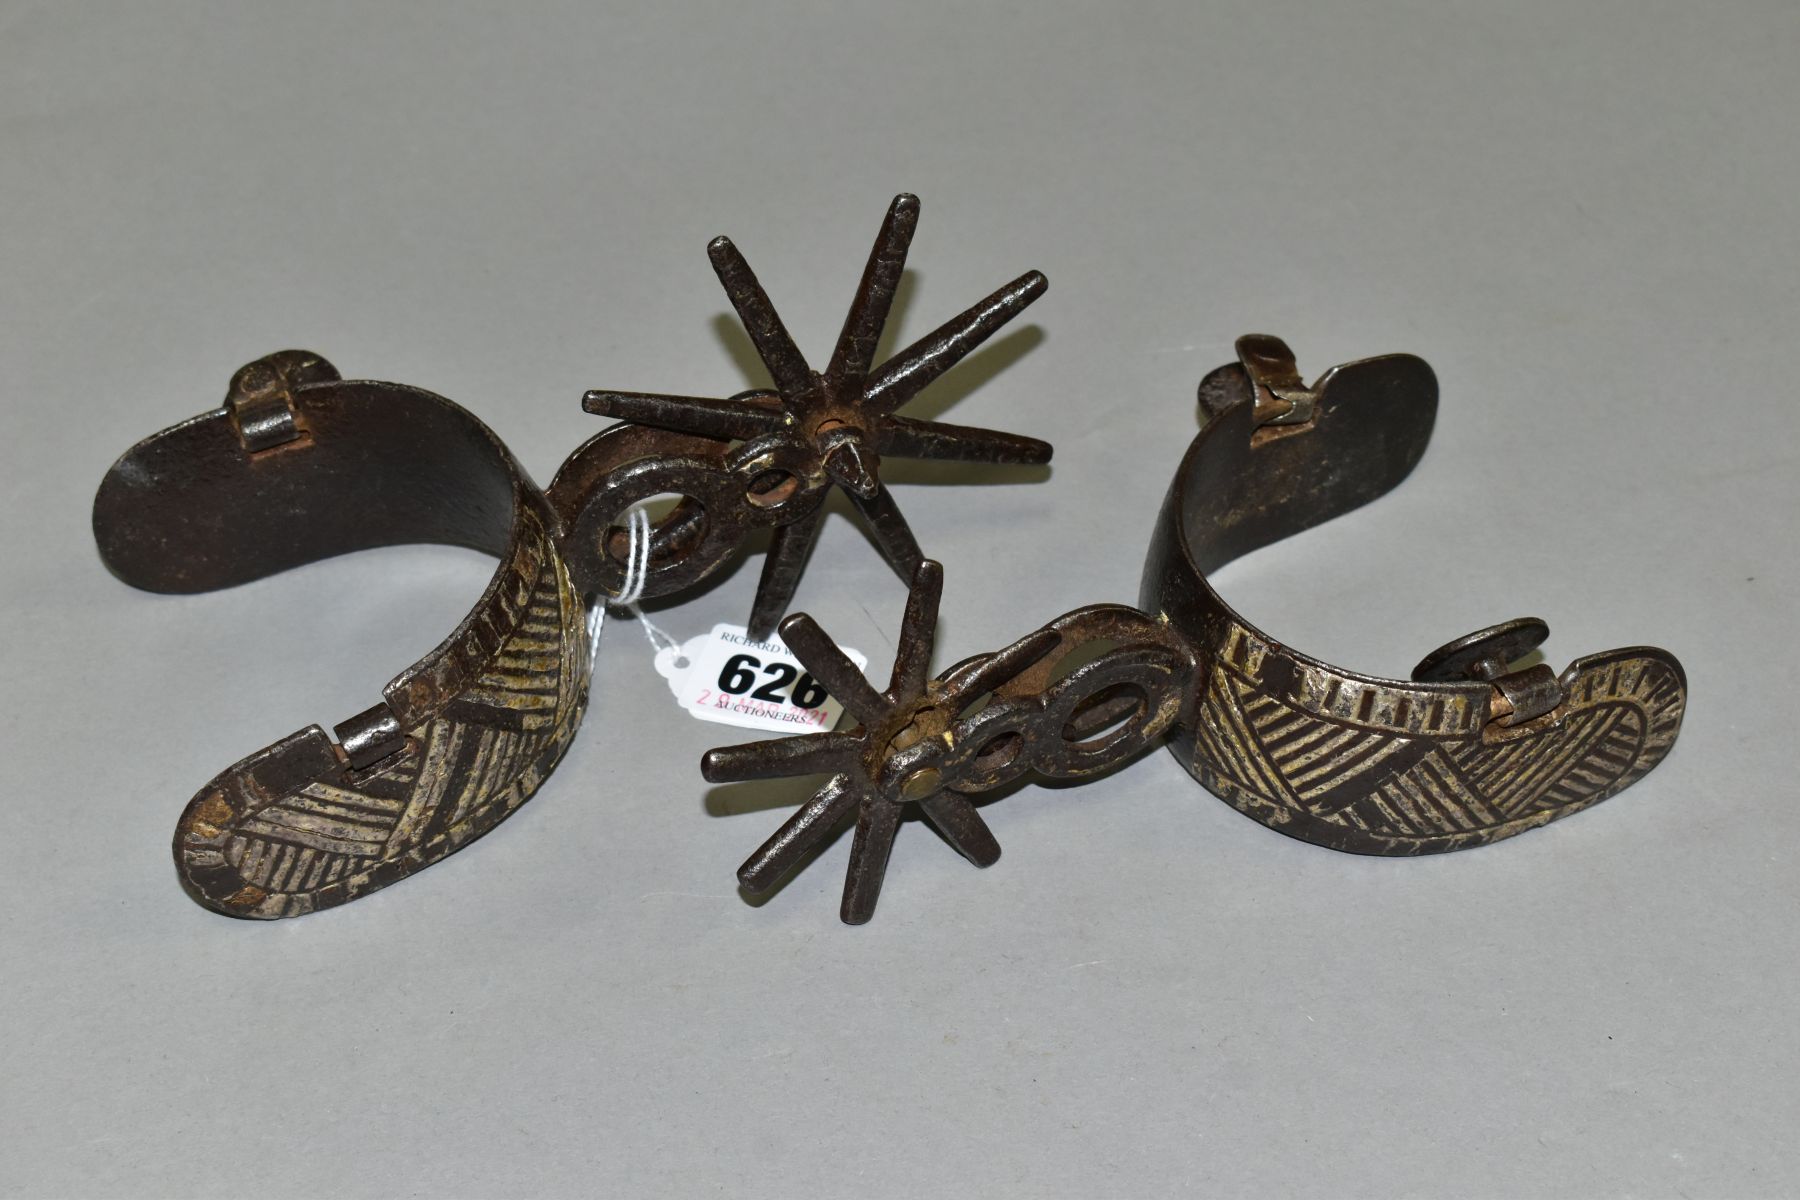 A PAIR OF SOUTH AMERICAN SILVER OVERLAID GAUCHO SPURS (2)